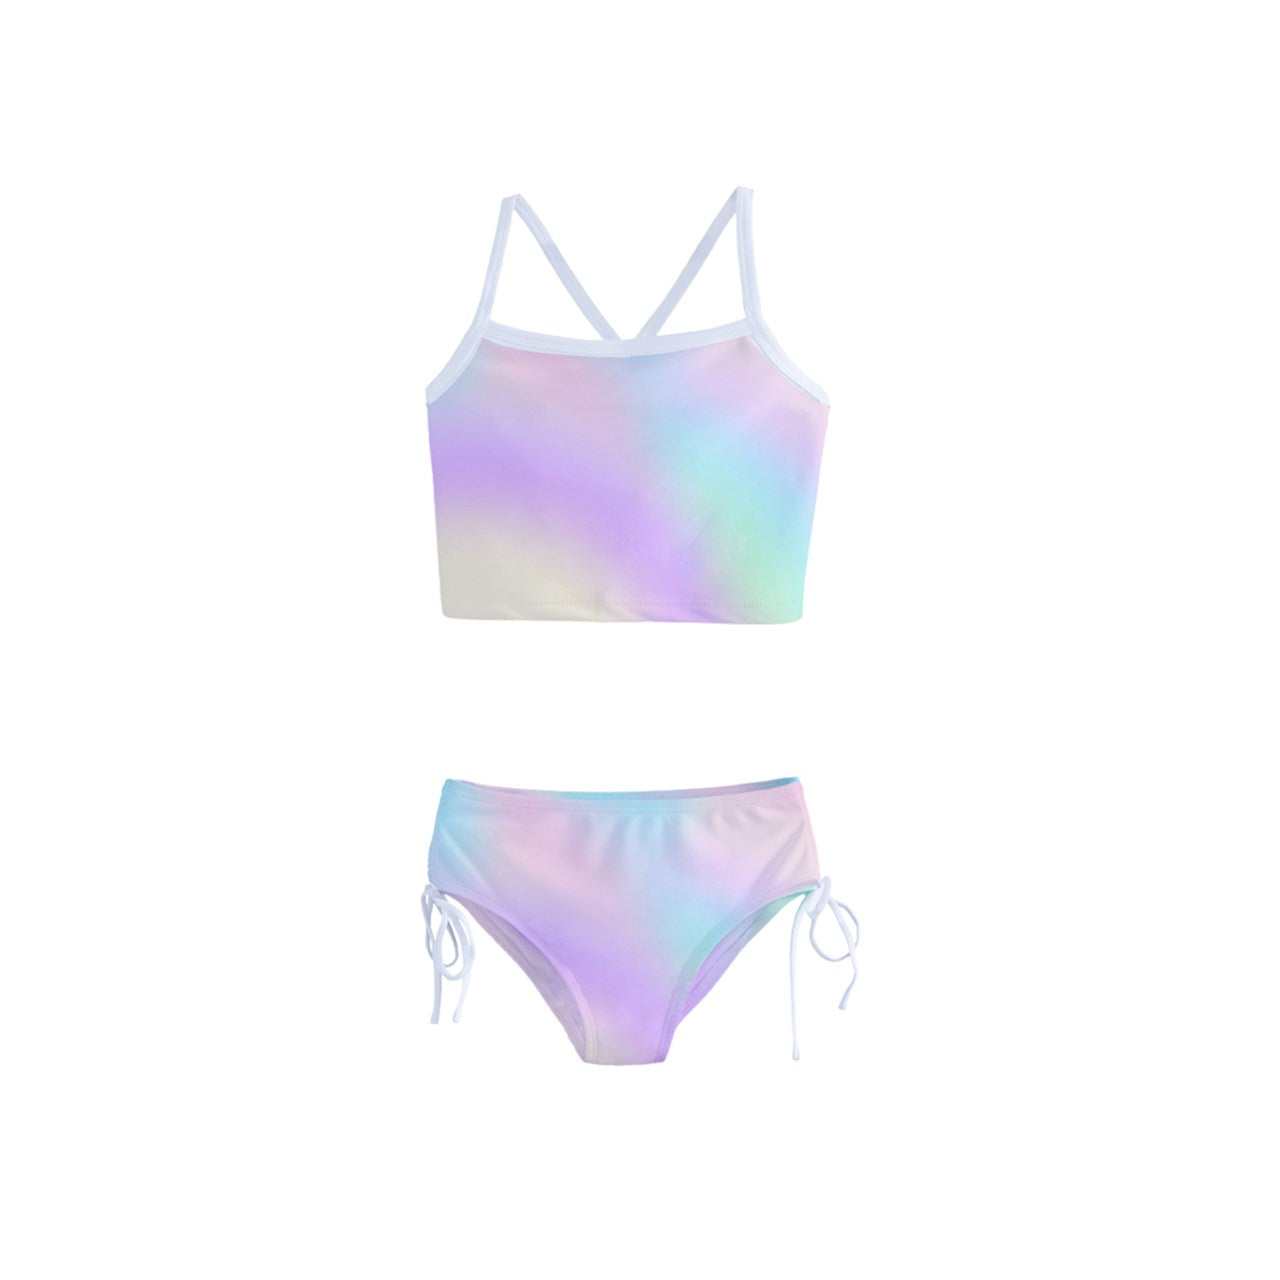 Cotton Candy Prism Girls' Tankini Swimsuit